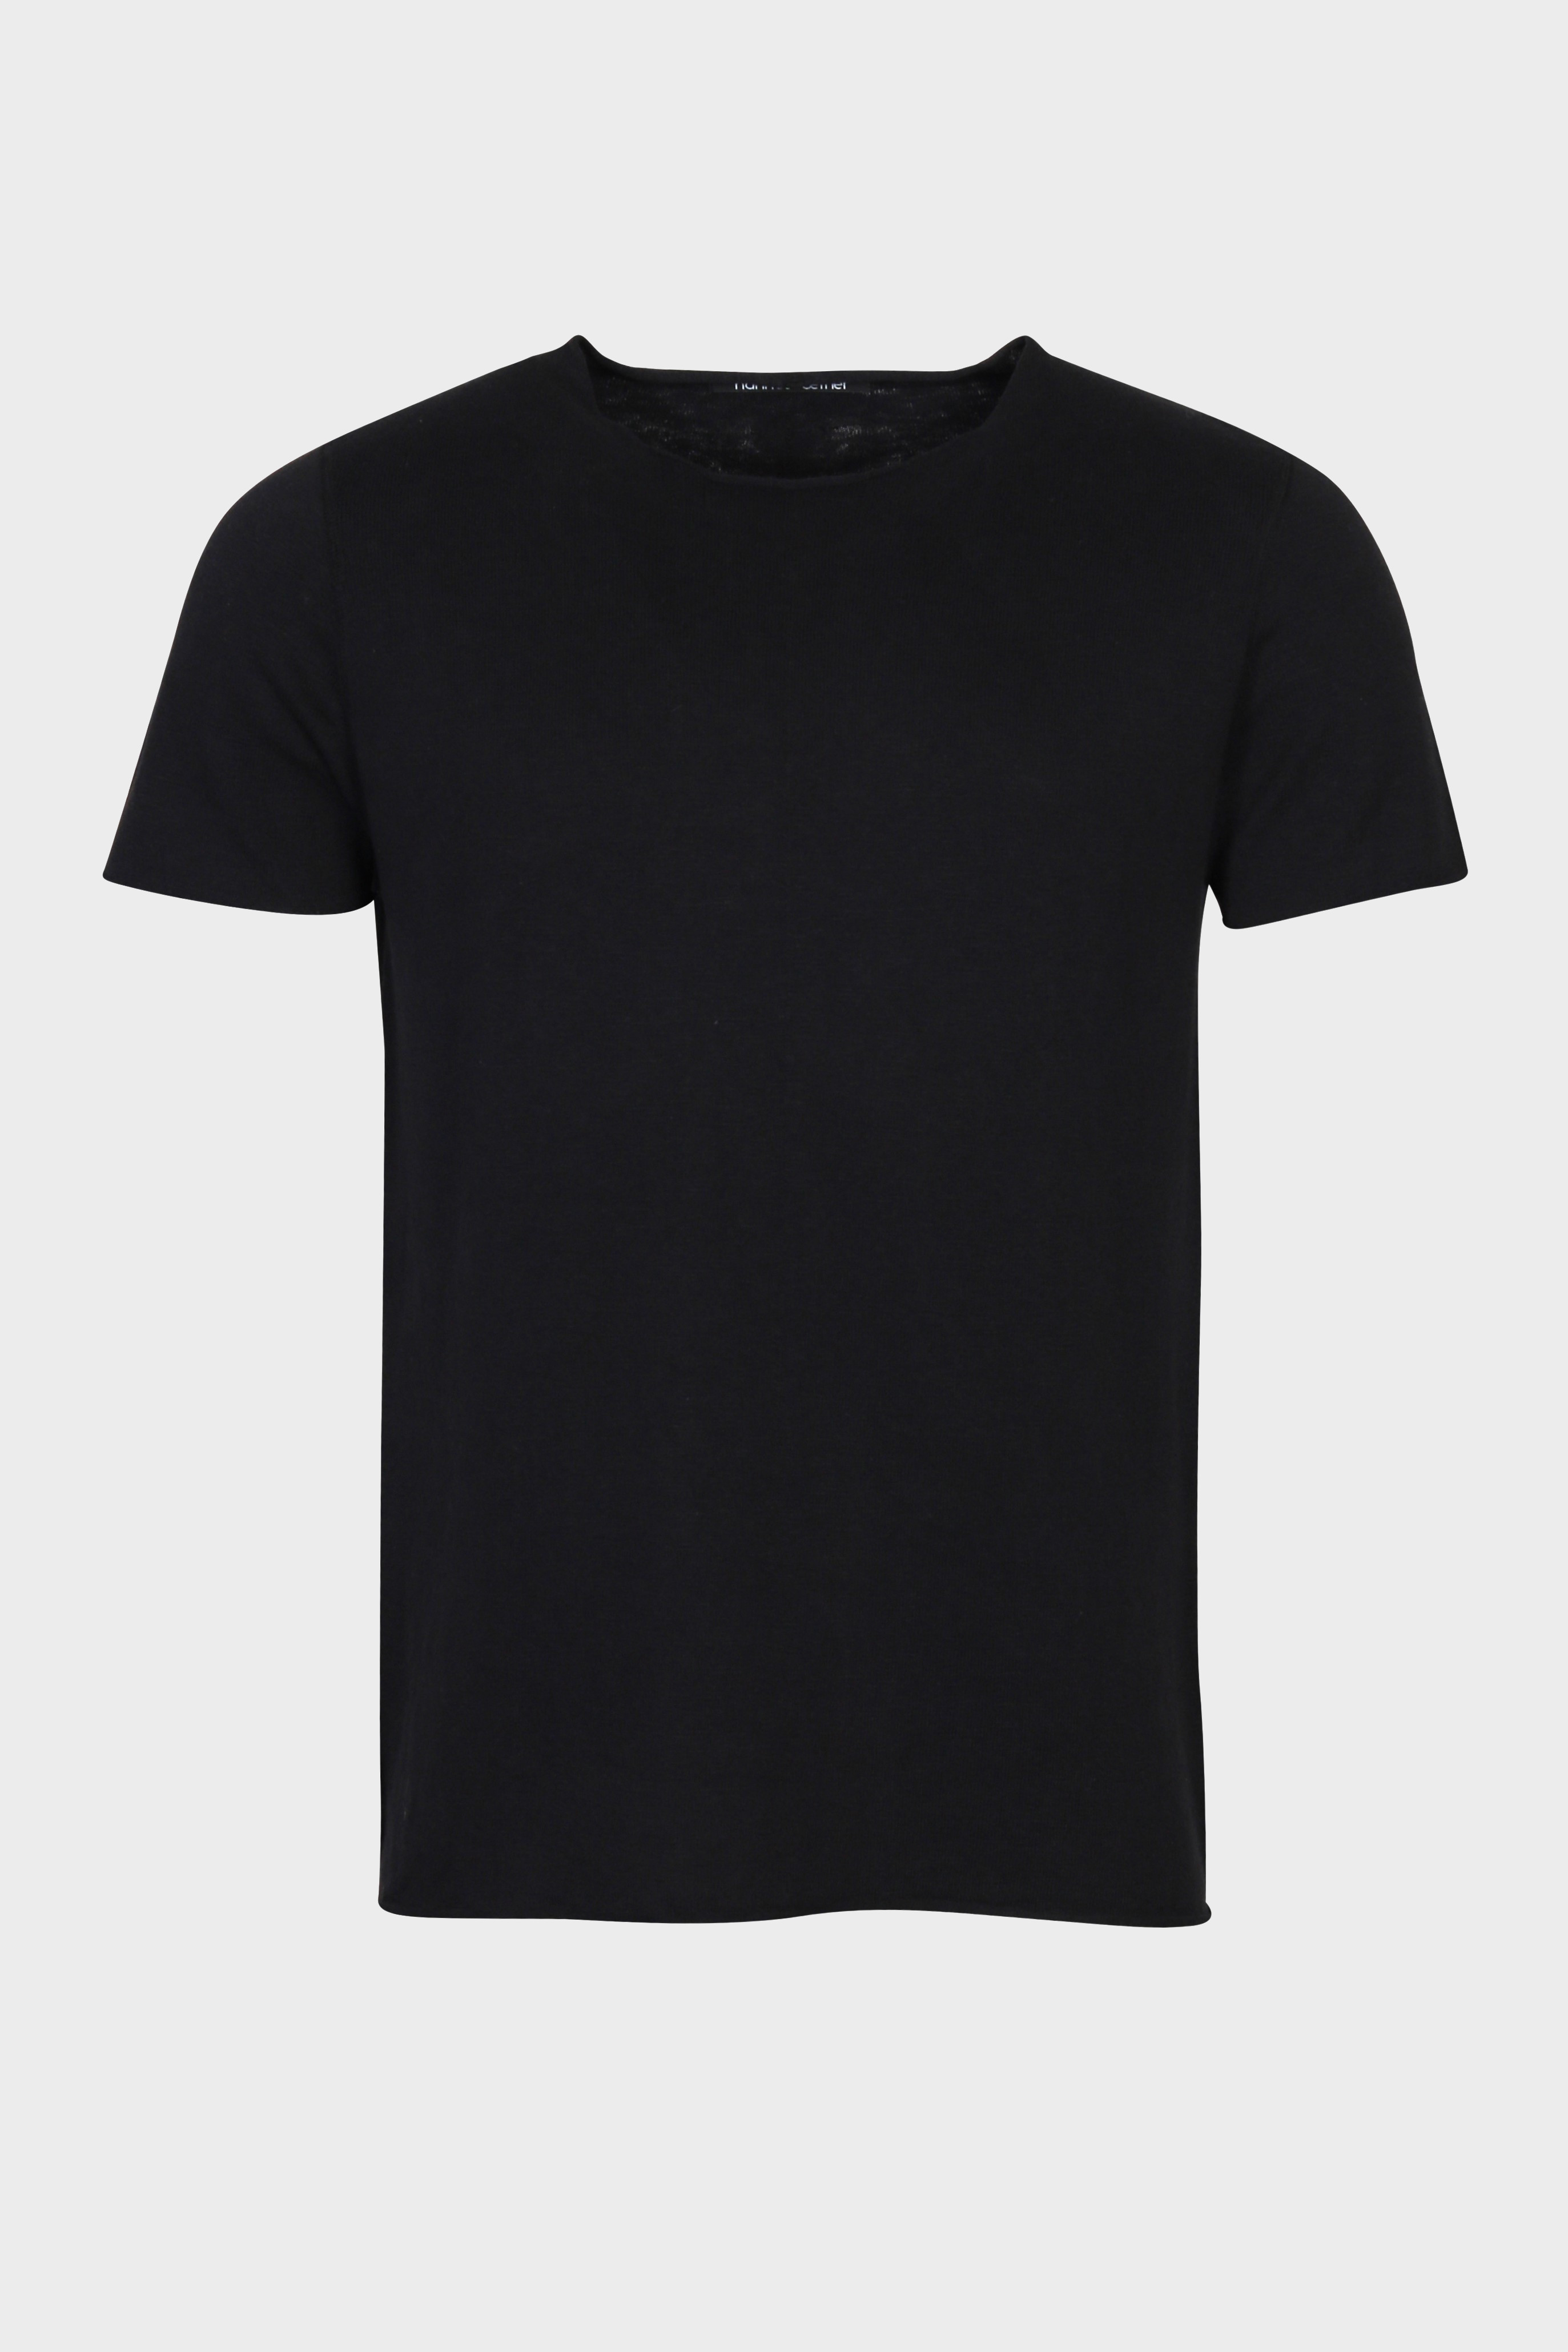 HANNES ROETHER Knit T-Shirt in Black M